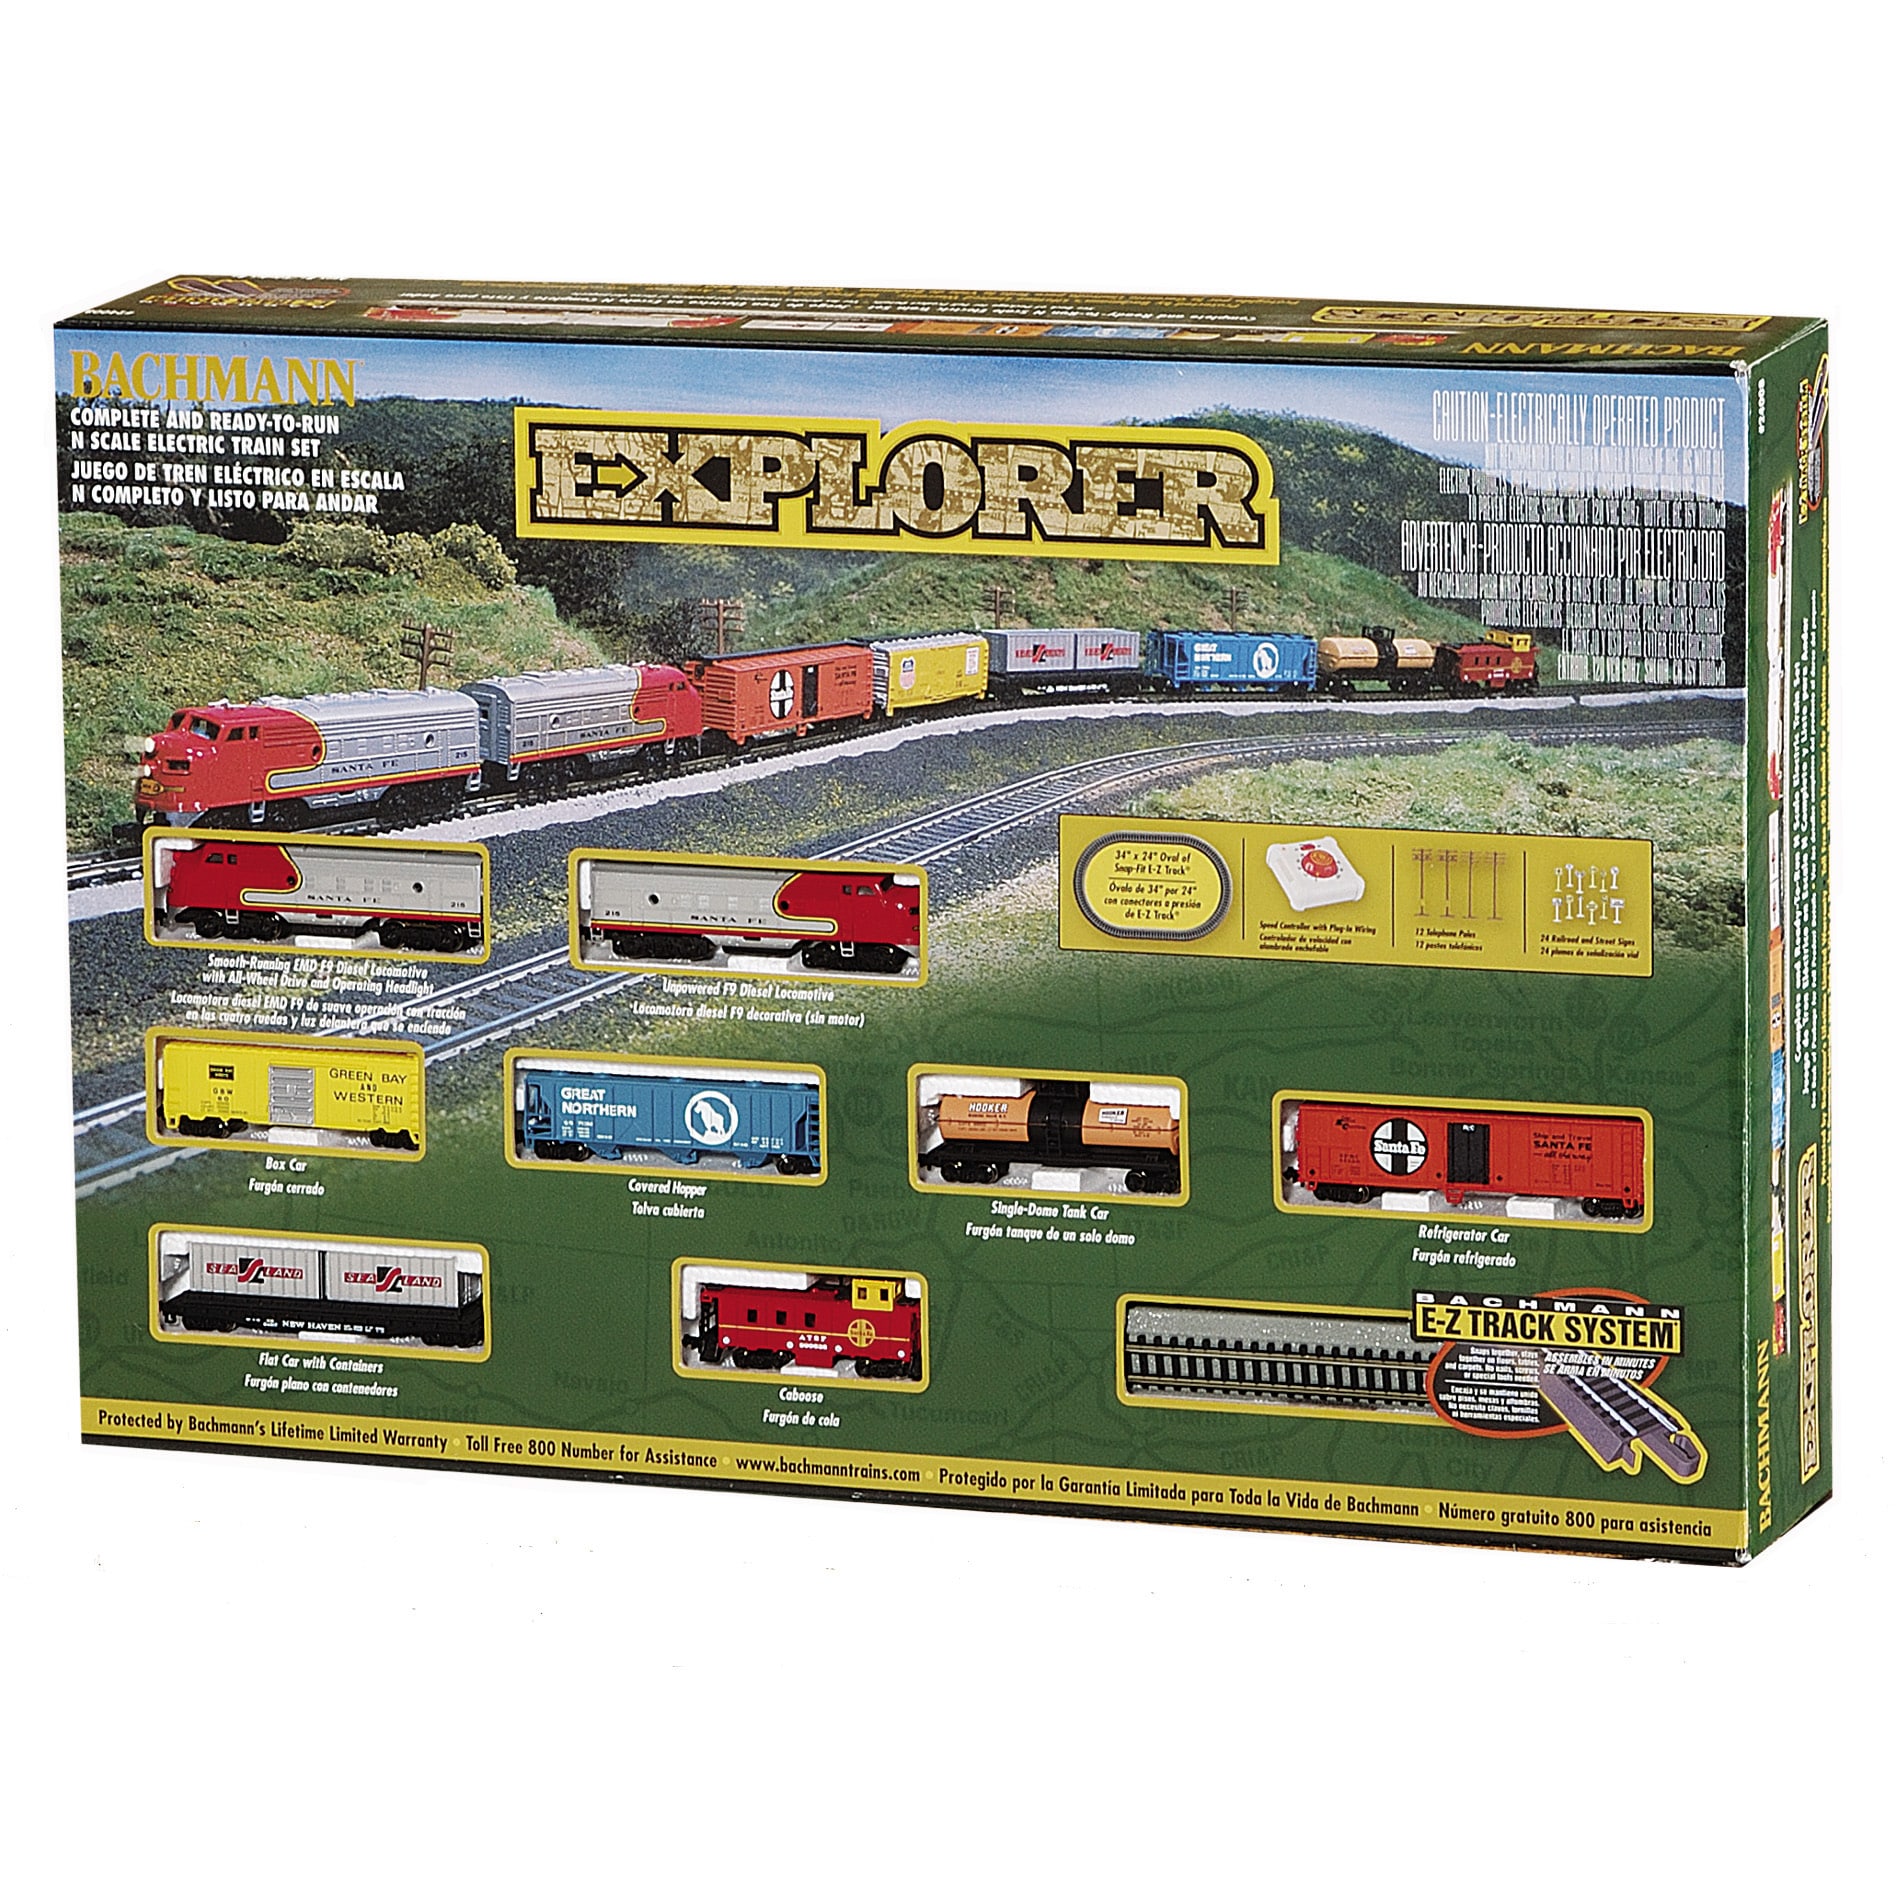  13922736 - Overstock.com Shopping - Big Discounts on Bachmann Trains